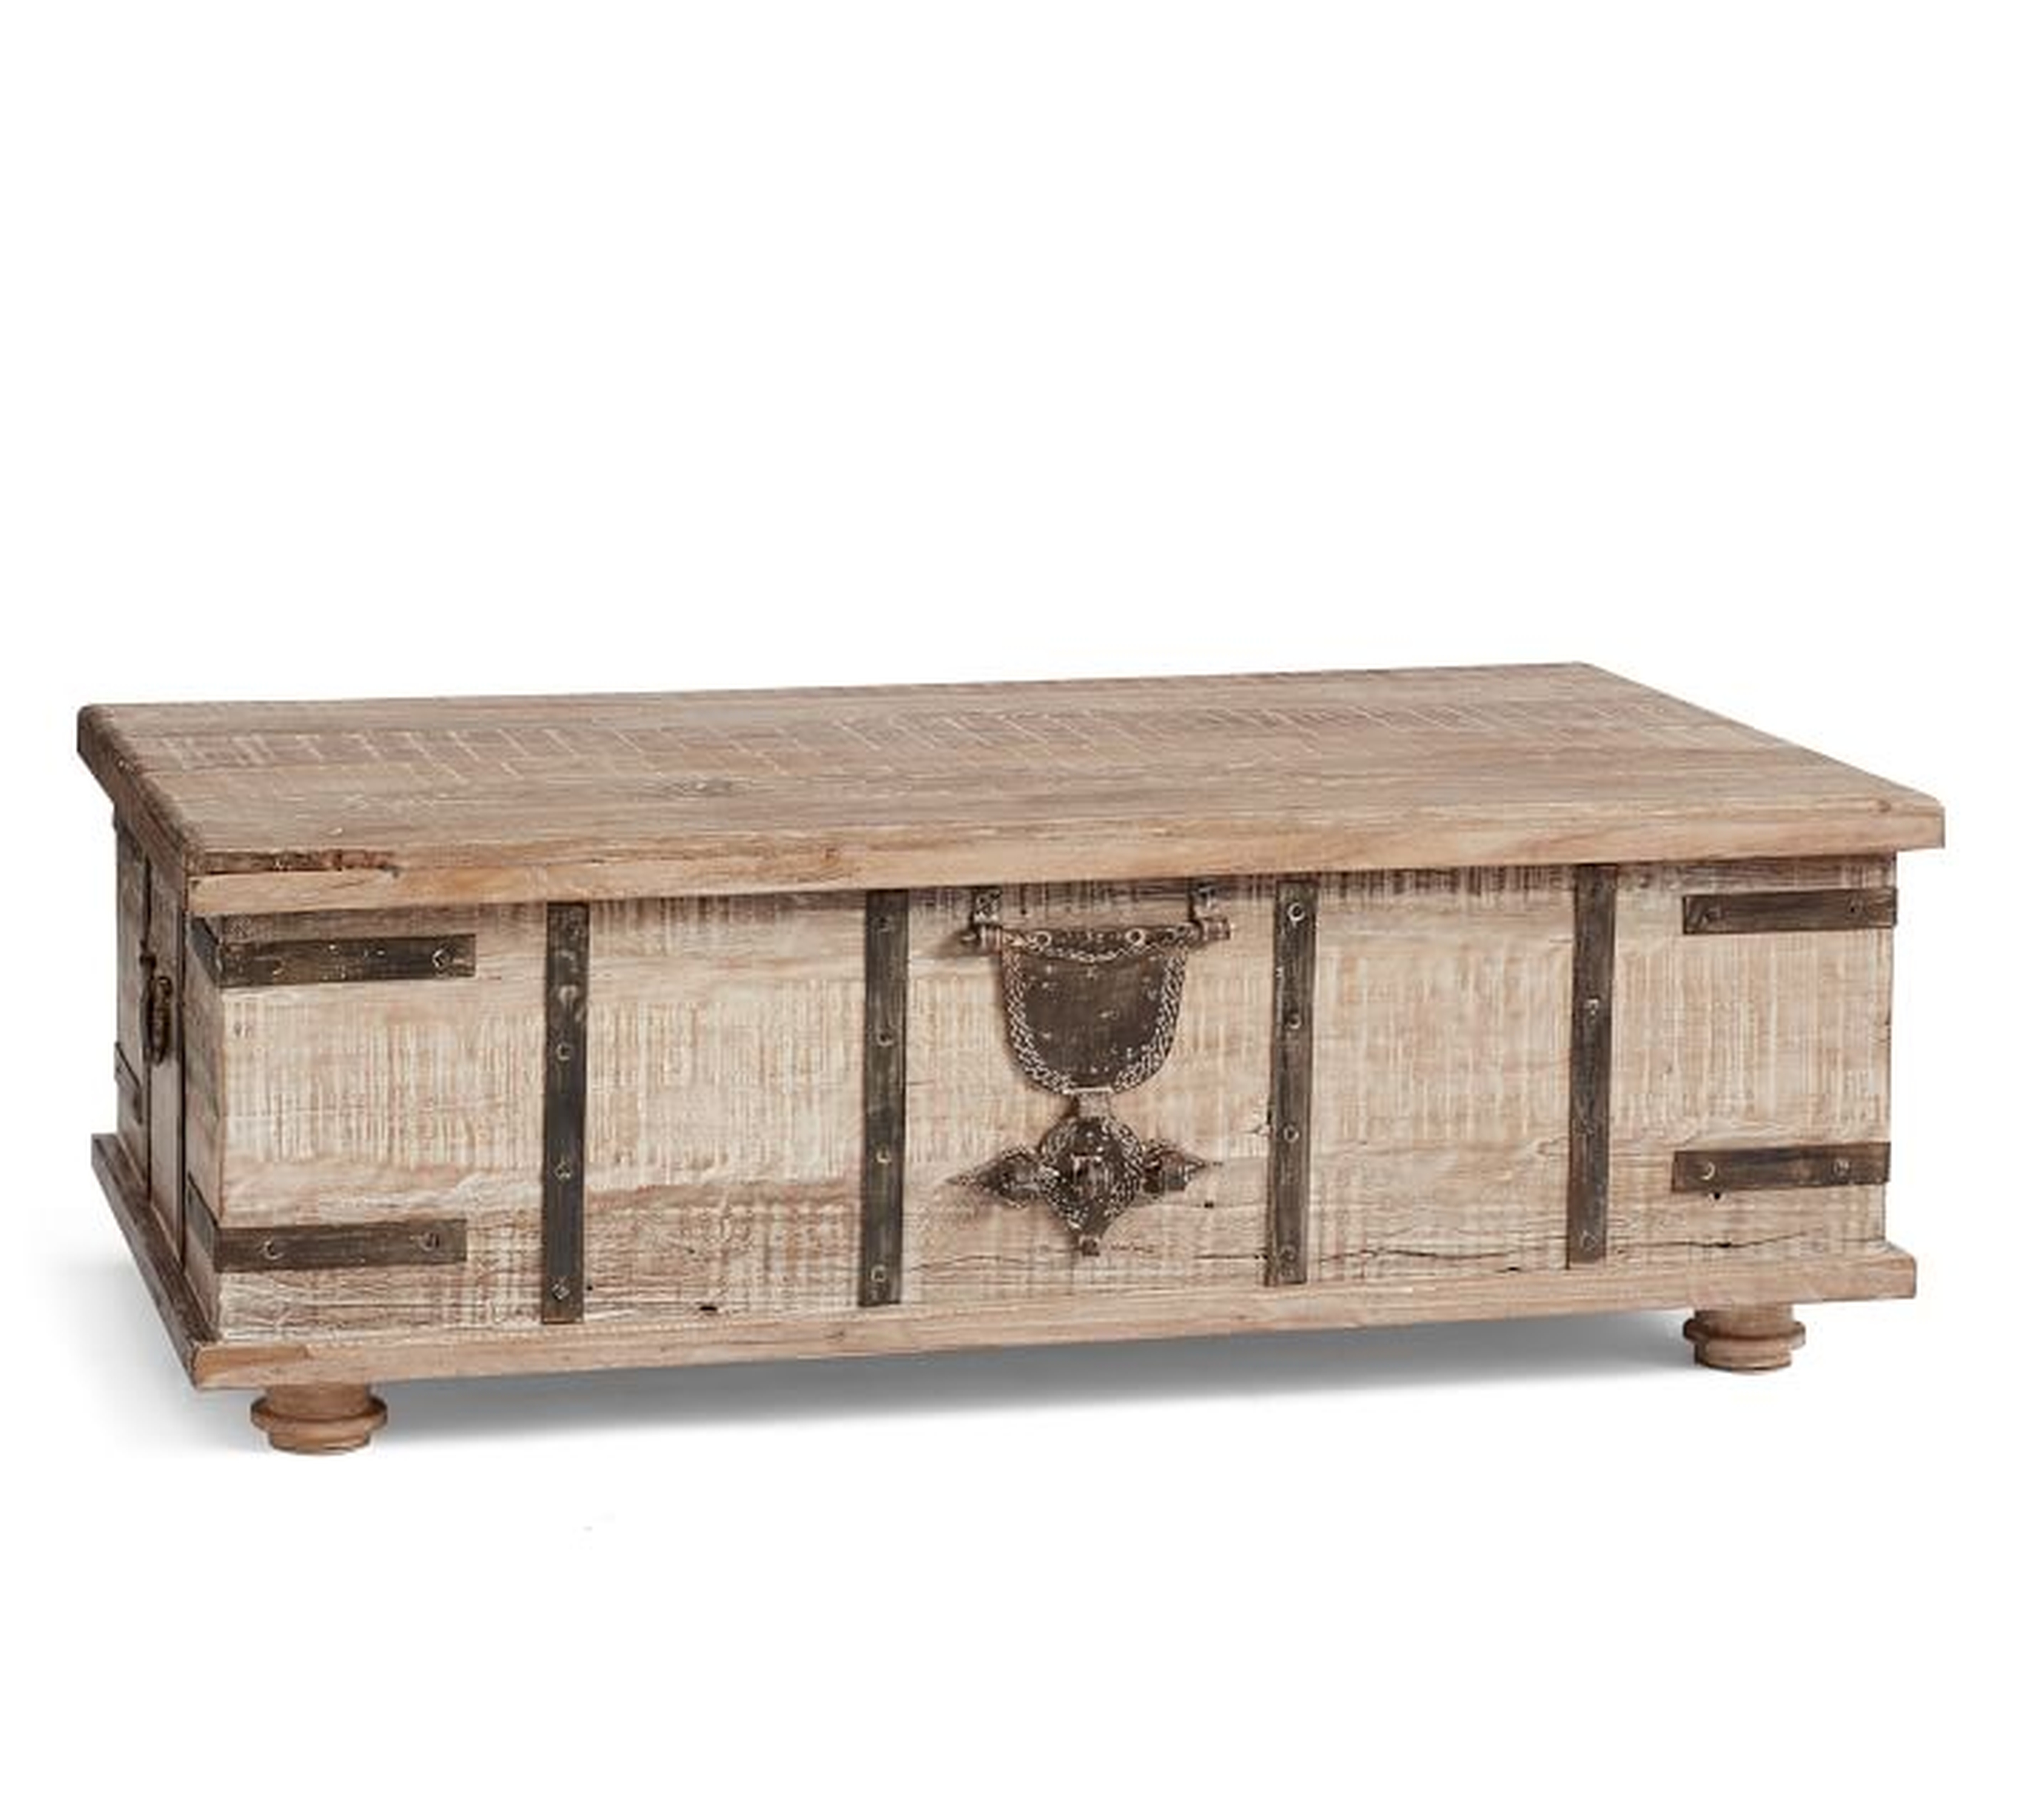 Kaplan Reclaimed Wood Lift-Top Trunk Coffee Table, Reclaimed White Wash, 52" - Pottery Barn